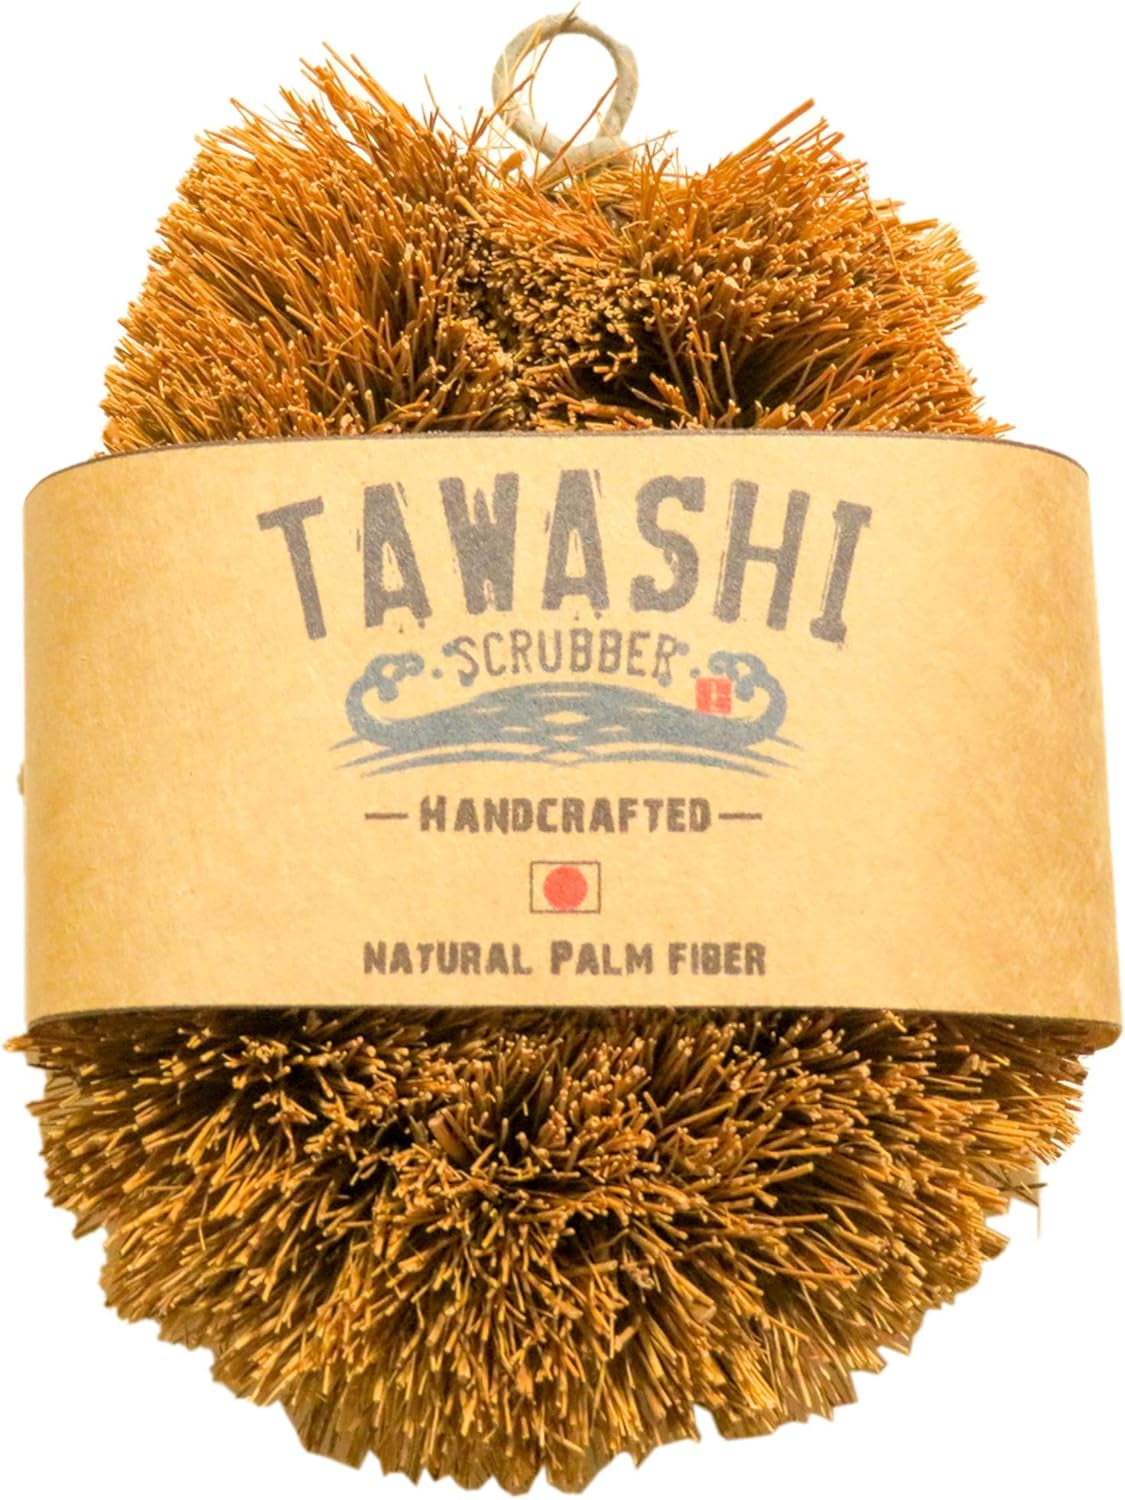 Japan Handcrafted Tawashi Brush Set of 2 - Natural Palm Fiber Scrubber for Eco-Friendly Cleaning of Pots, Pans, and Vegetables - Handheld and Long-Lasting